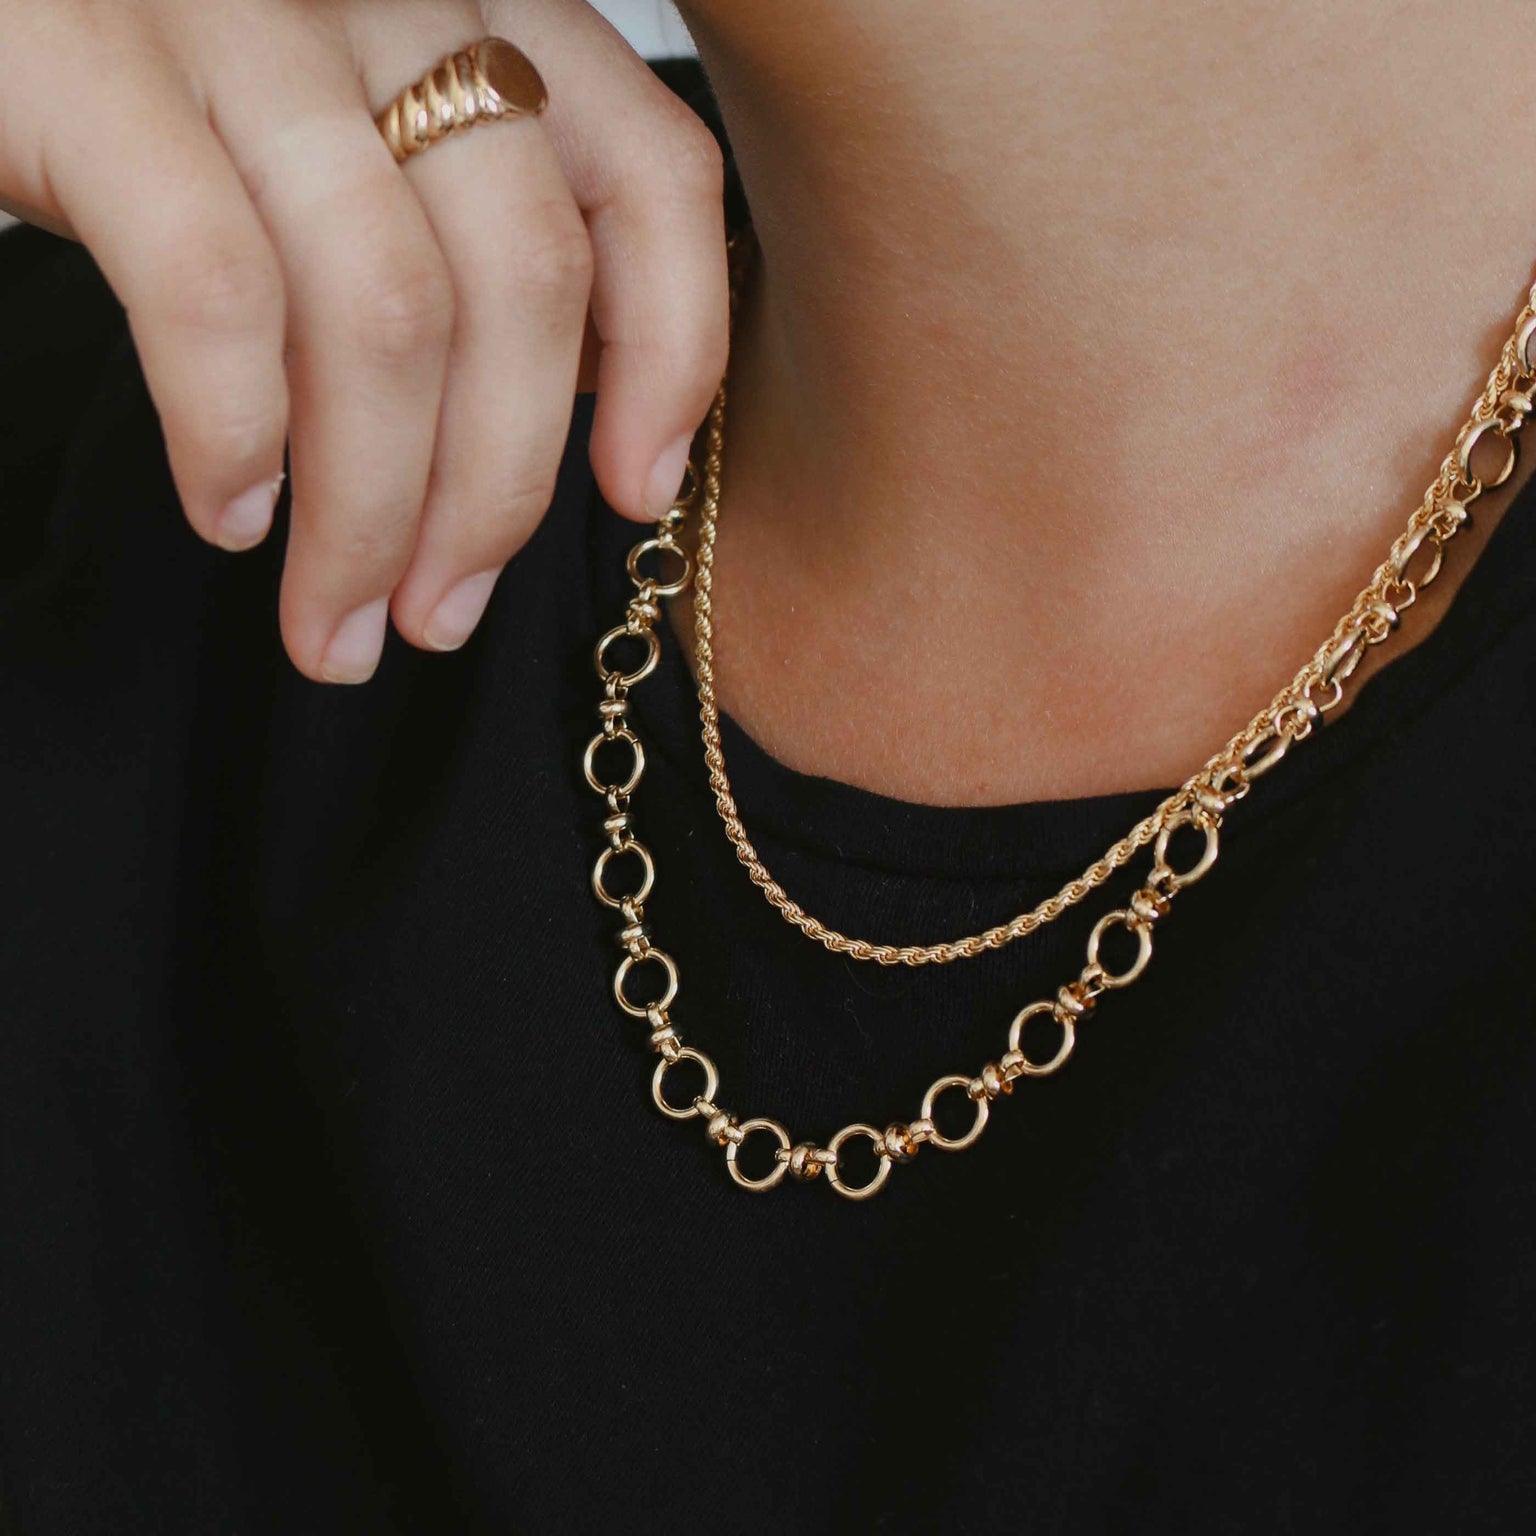 Rope Chain Necklace in Gold worn with gold chunky chain necklace